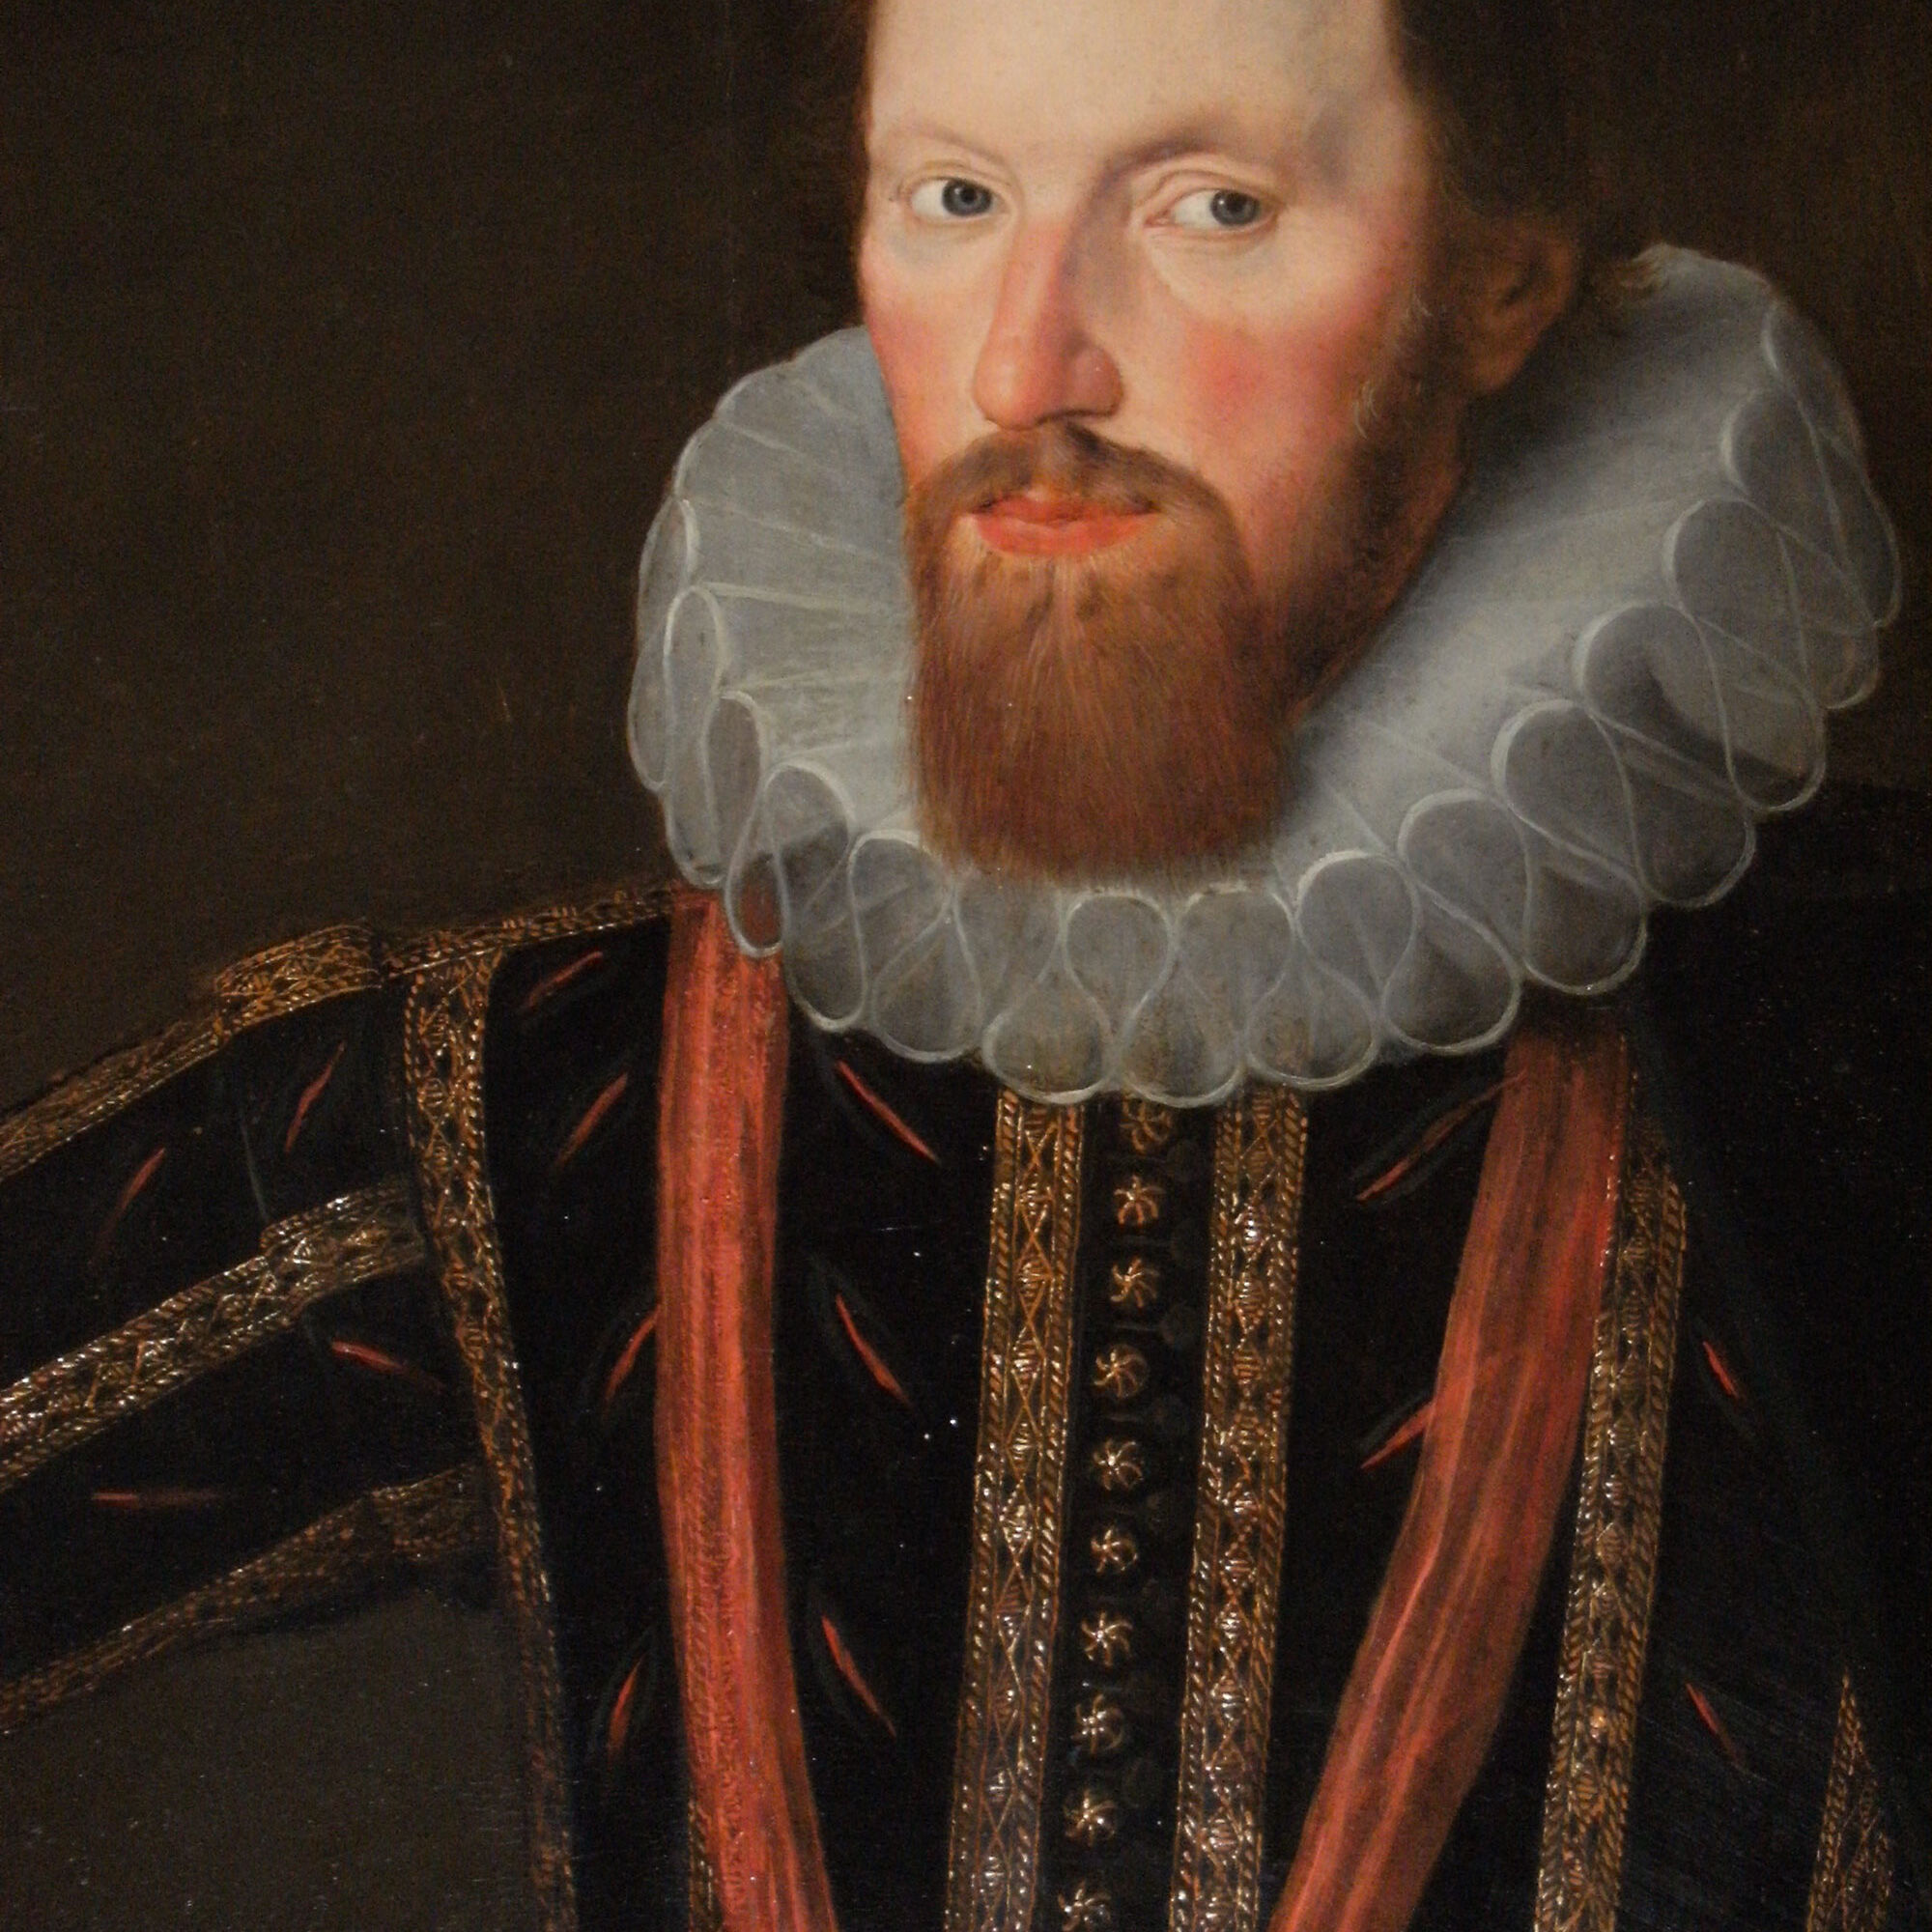 attributed to Robert Peake, (English, circa 1551-1626) portrait of Edward Lord Montagu, 1st Lord Montagu of Boughton, 1601 The Johnston Collection (A0951-1989, Foundation Collection) image © The Johnston Collection, Australia